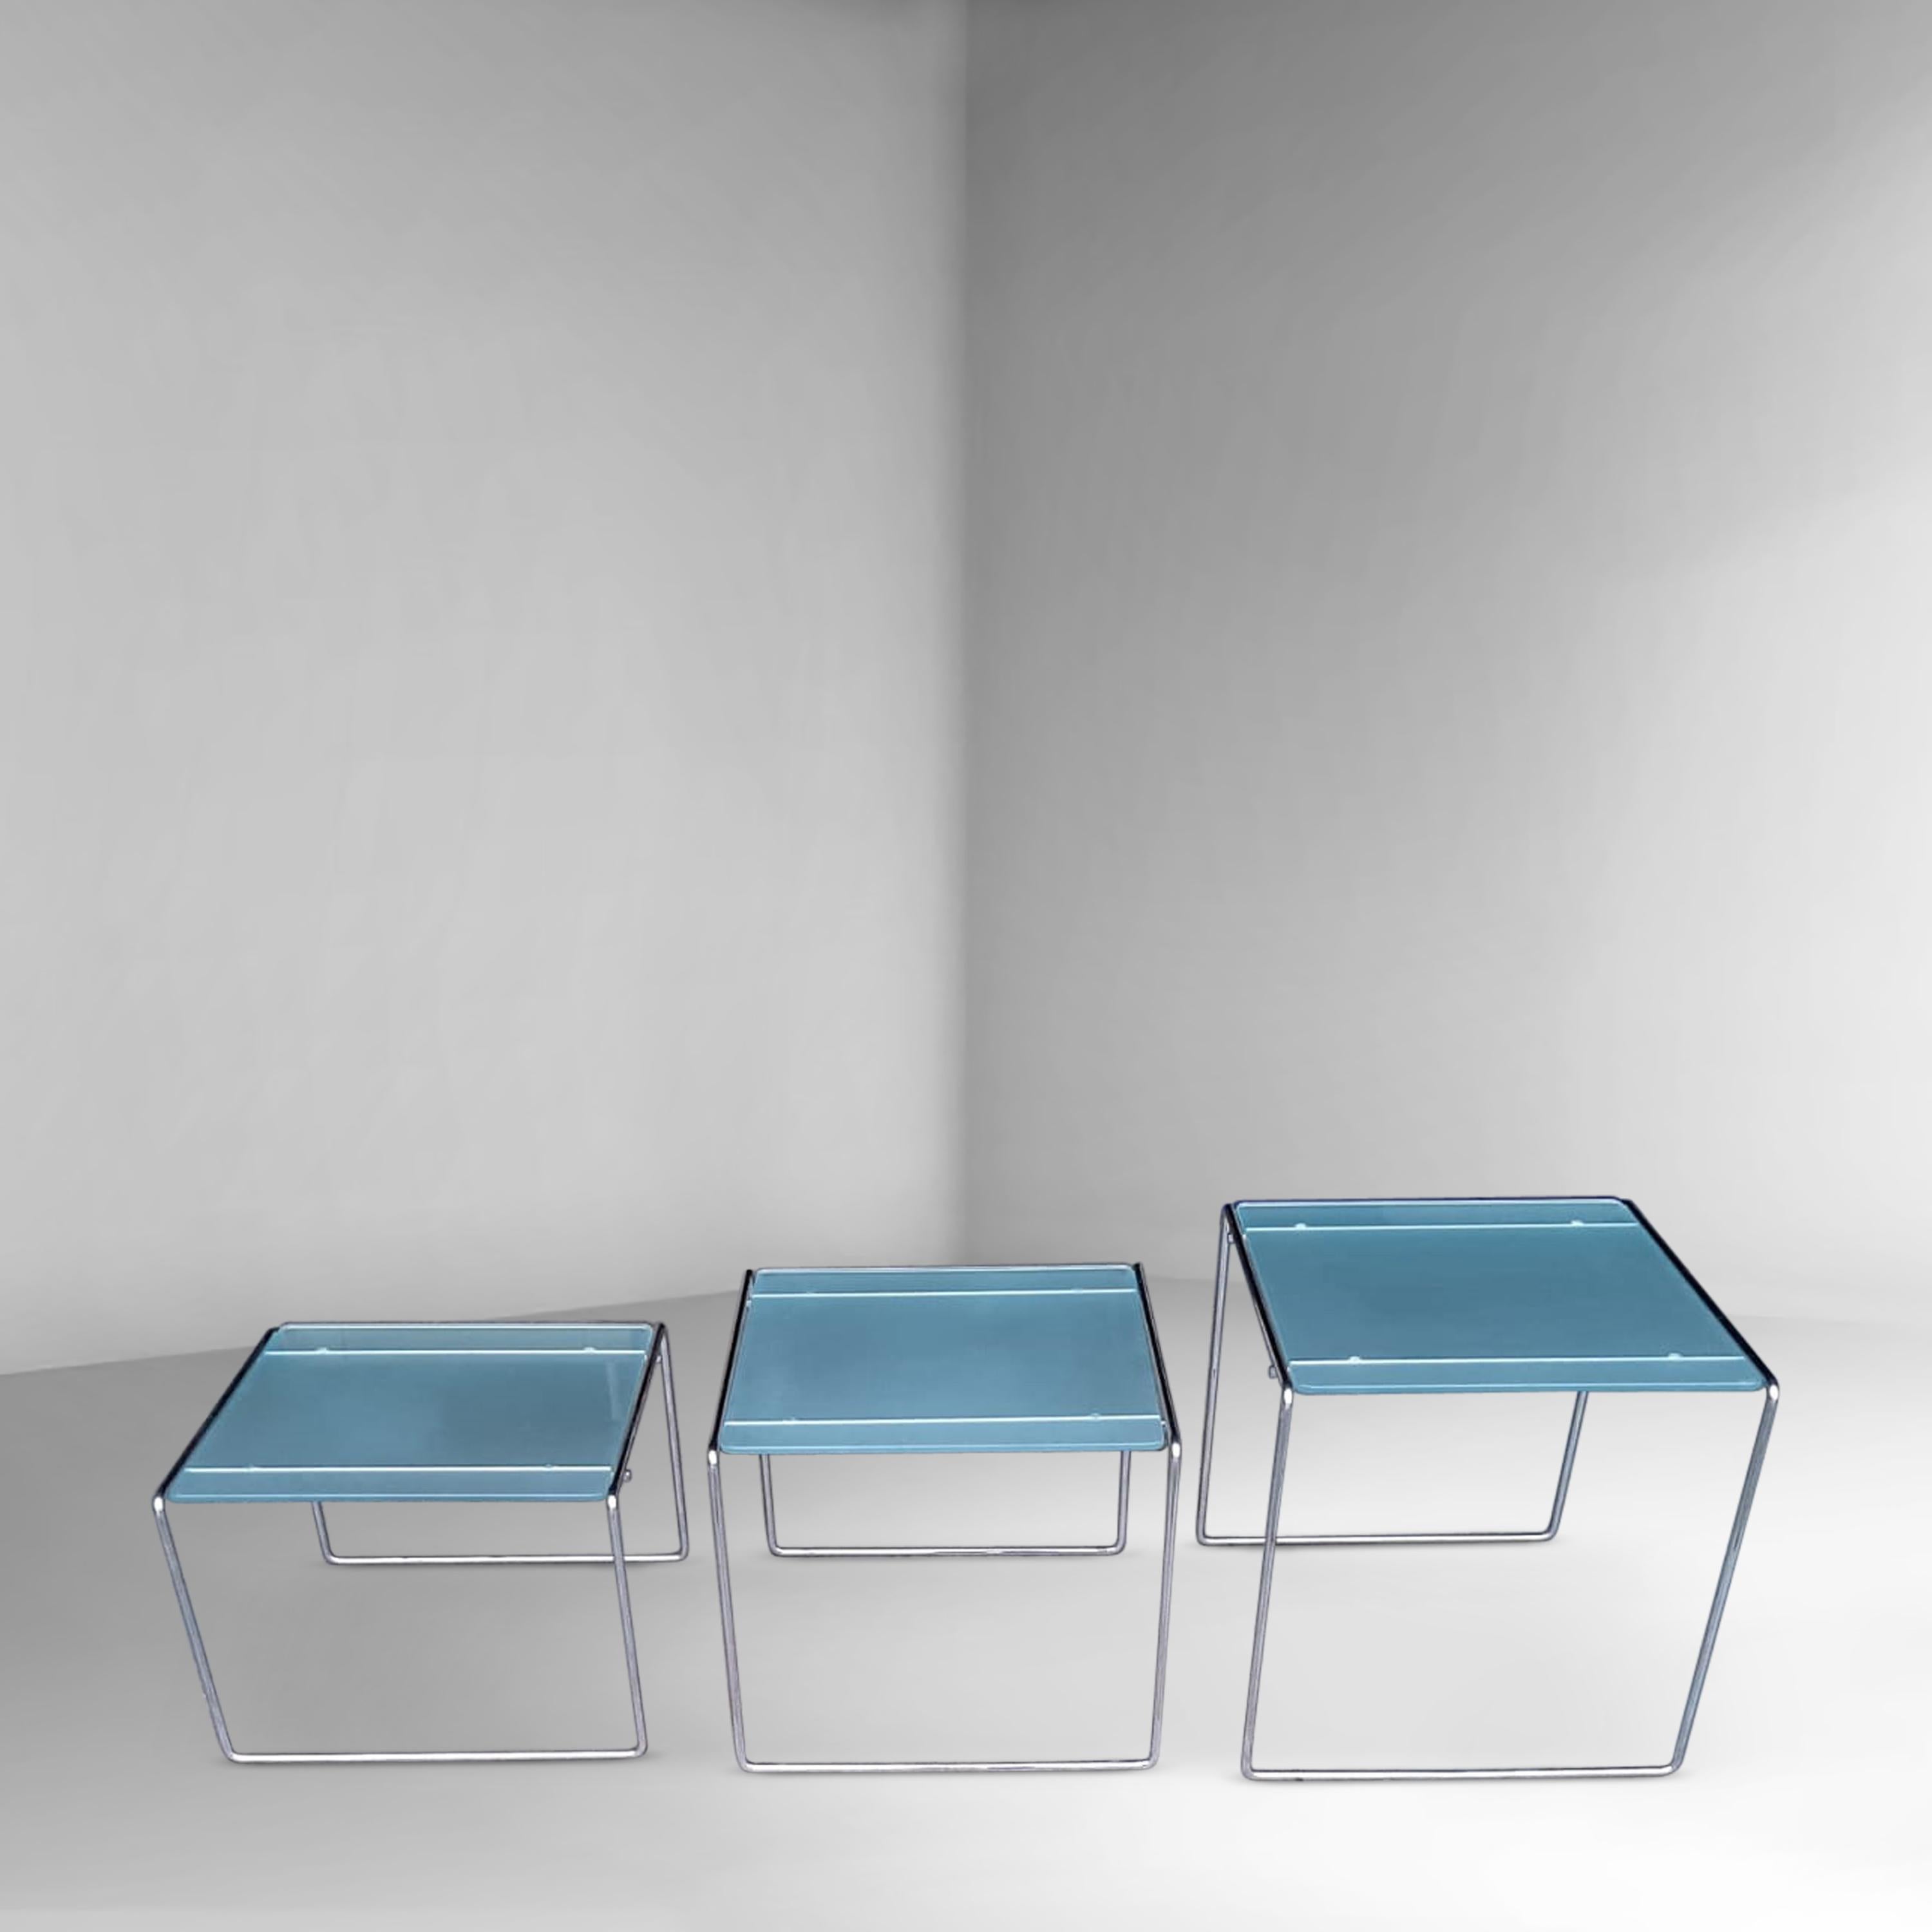 Minimalist design side table, inspired by Mies van der Rohe with simple abstract lines. The metal lower frame is bent steel and consist of 1 part. The entire design looks very sleek due to its thin shaped frame. The milk glass plate lays on top of